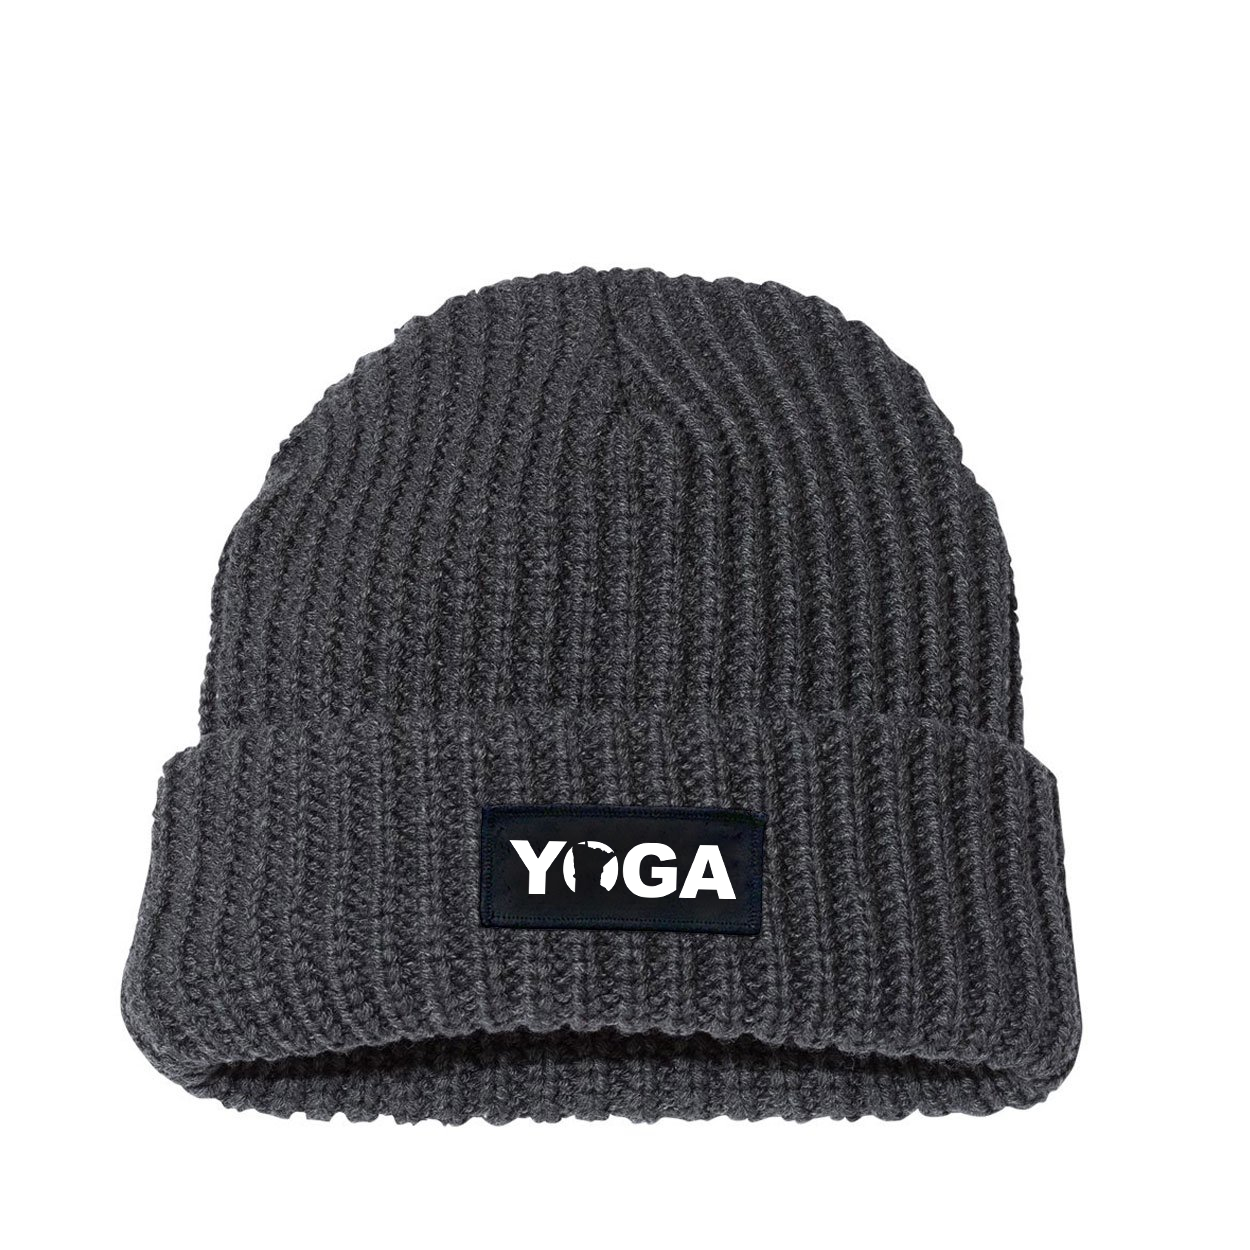 Yoga Minnesota Night Out Woven Patch Roll Up Jumbo Chunky Knit Beanie Charcoal (White Logo)